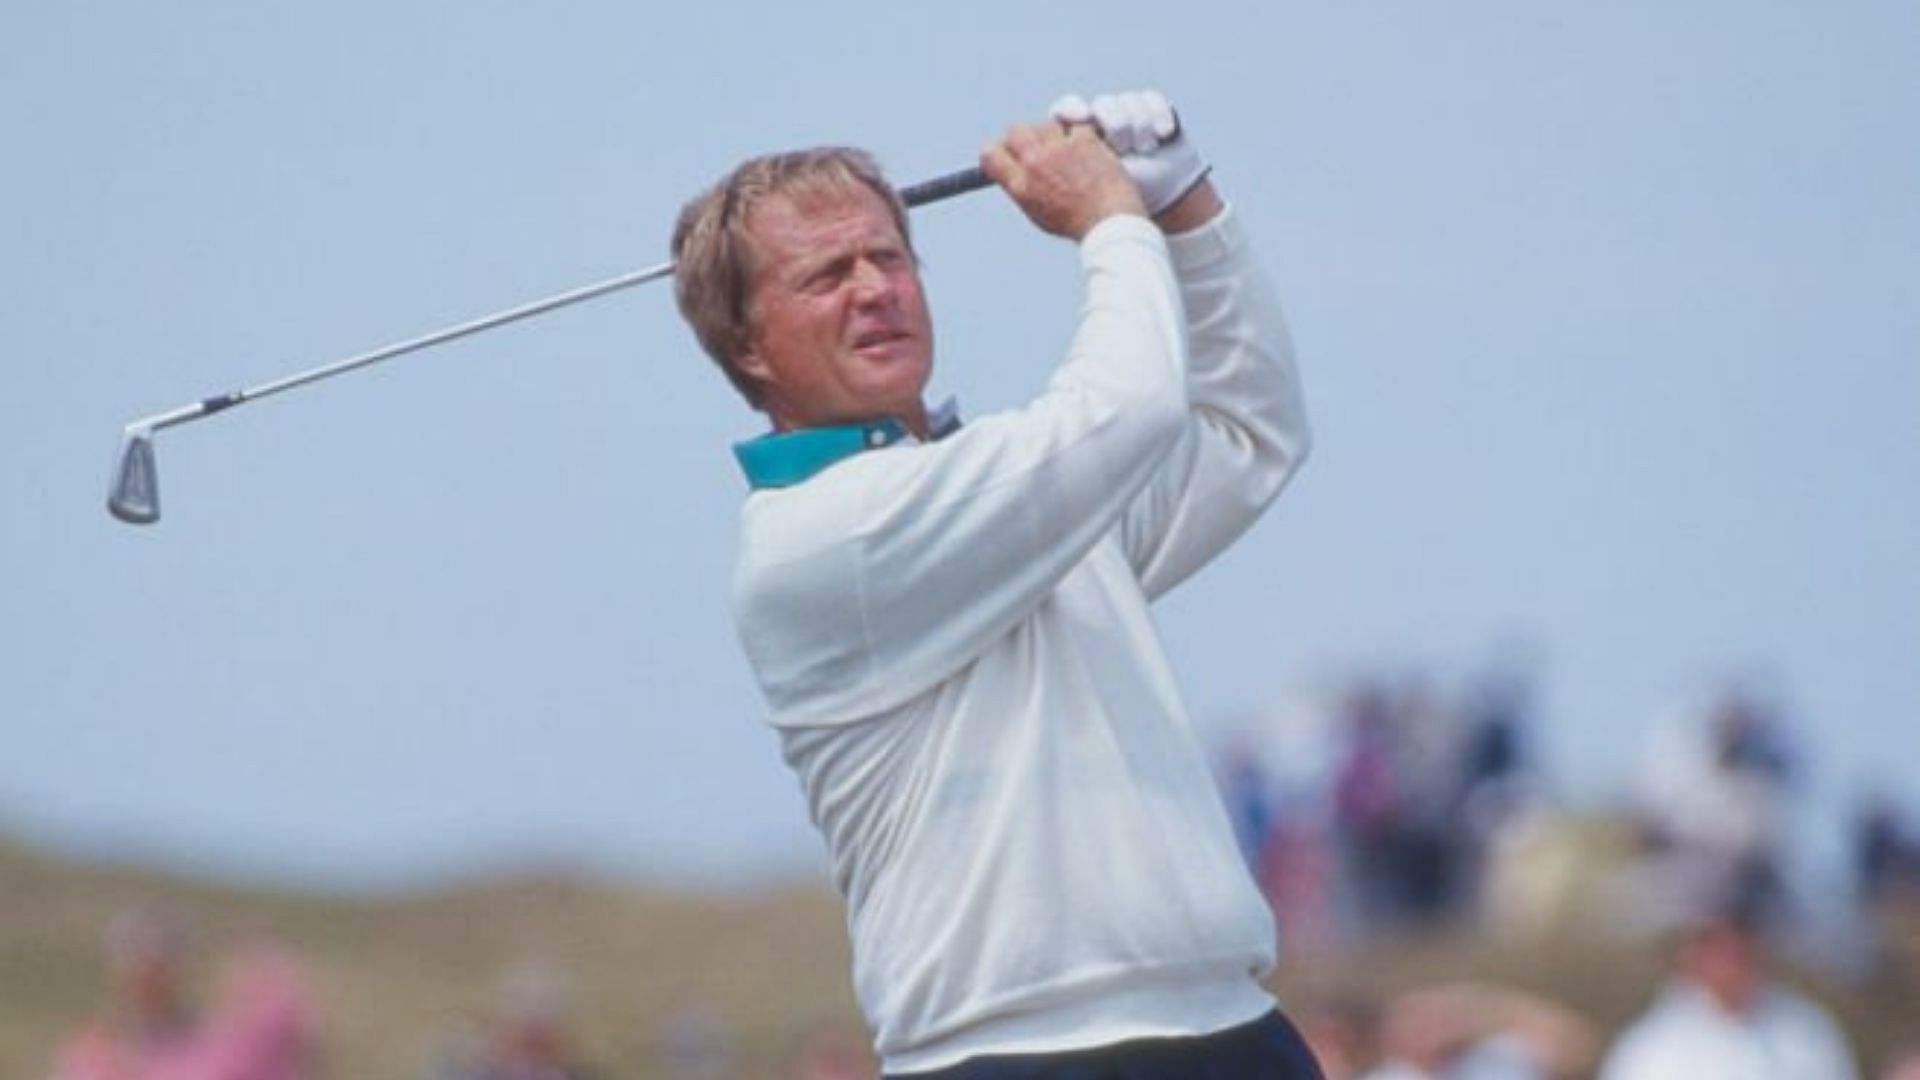 Jack Nicklaus at the US Open (Image via Getty)